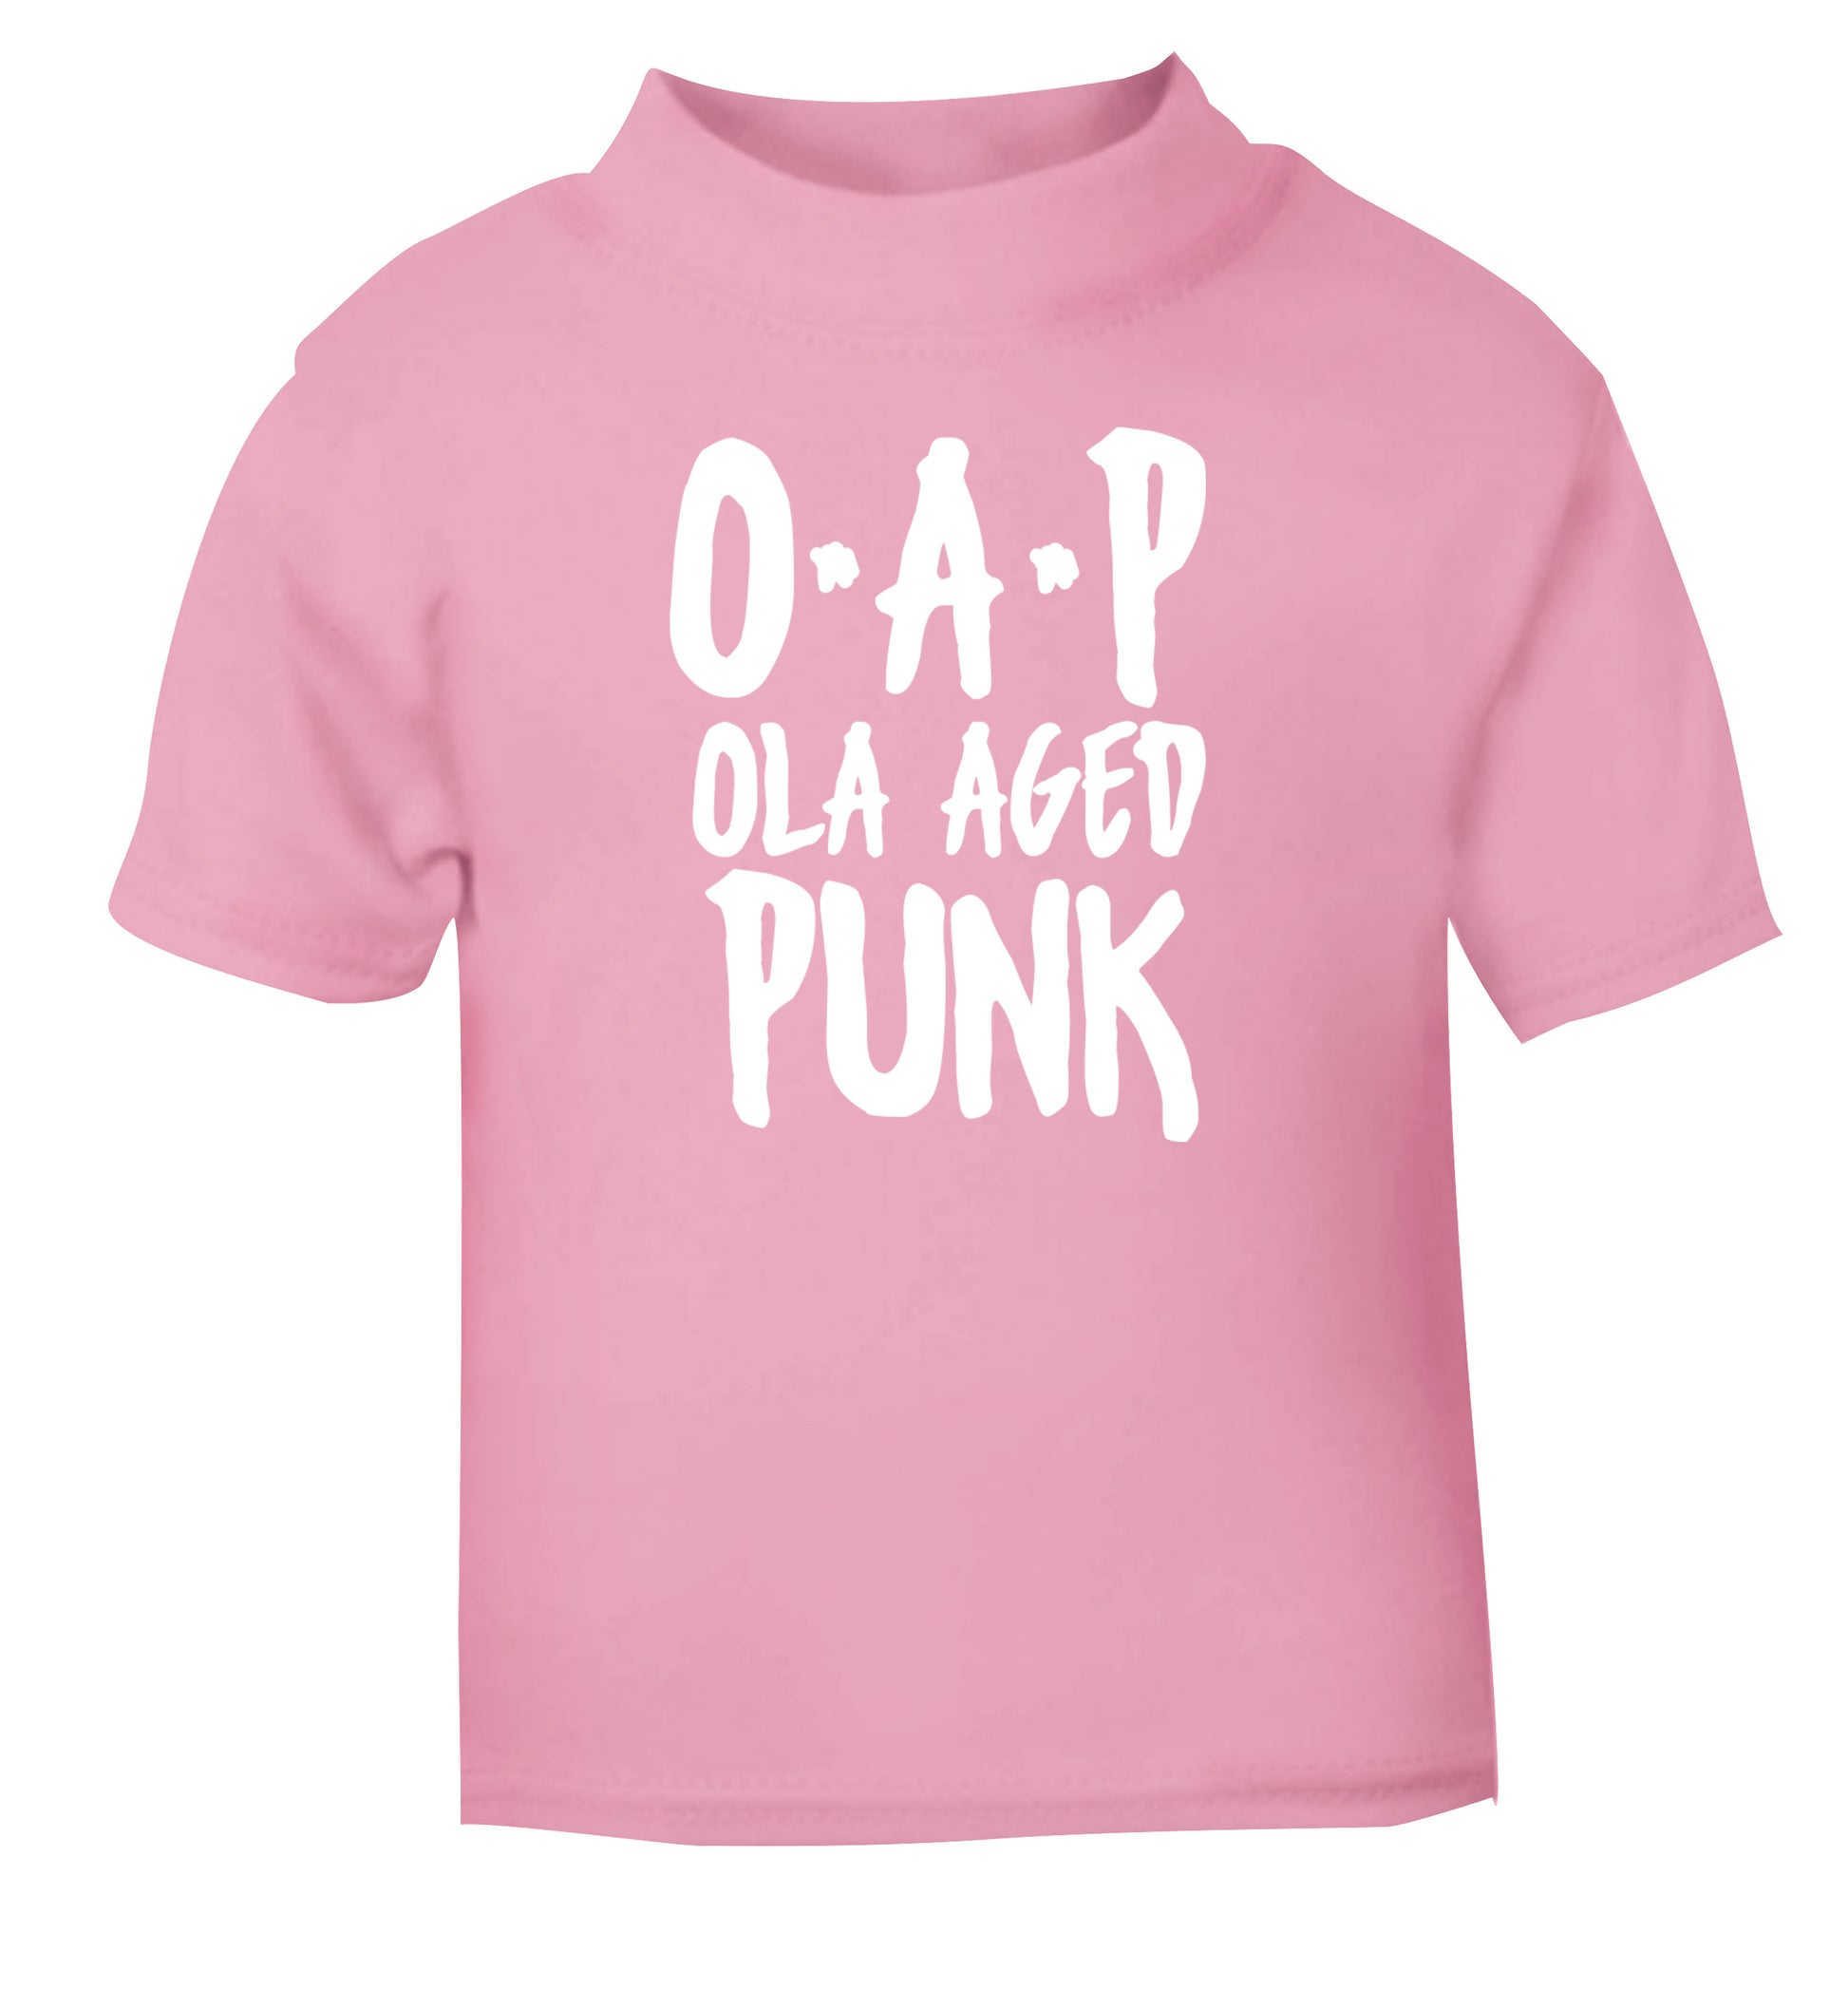 O.A.P Old Aged Punk light pink Baby Toddler Tshirt 2 Years